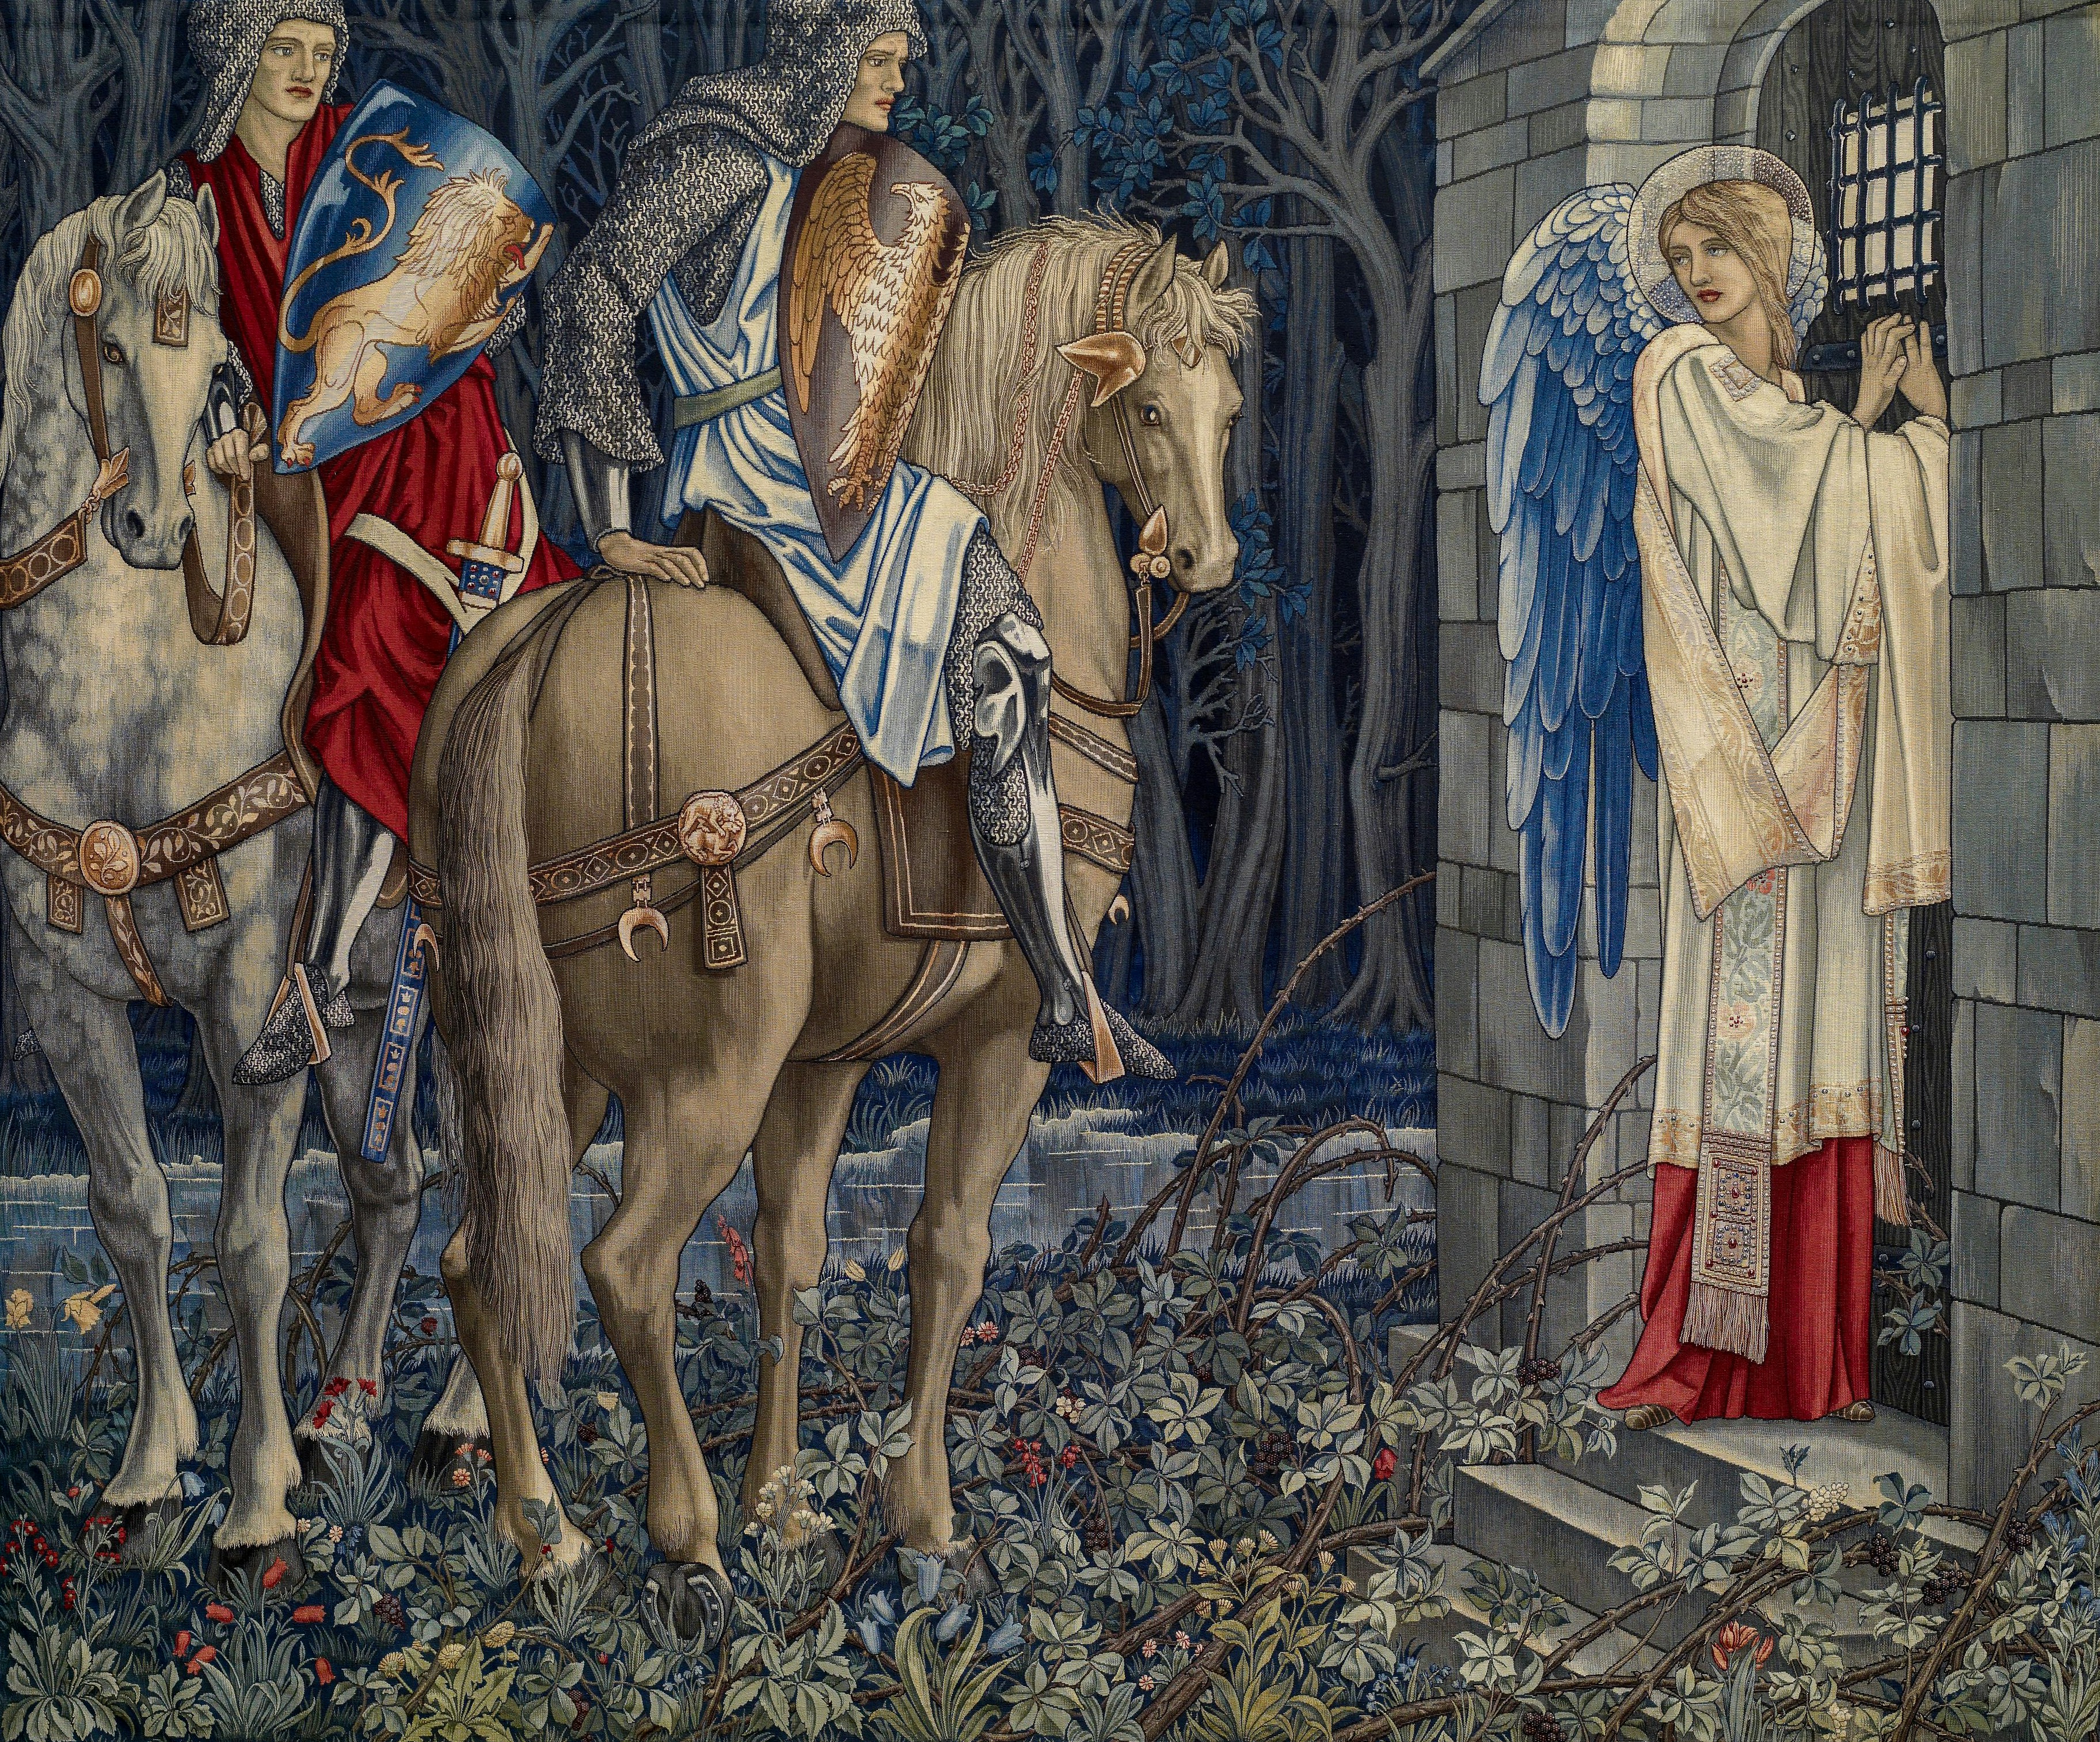 Quest for the Holy Grail Tapestries - Panel 3 - The Failure of Sir Gawaine; Sir Gawaine and Sir Uwaine at the Ruined Chapel, 1895-96